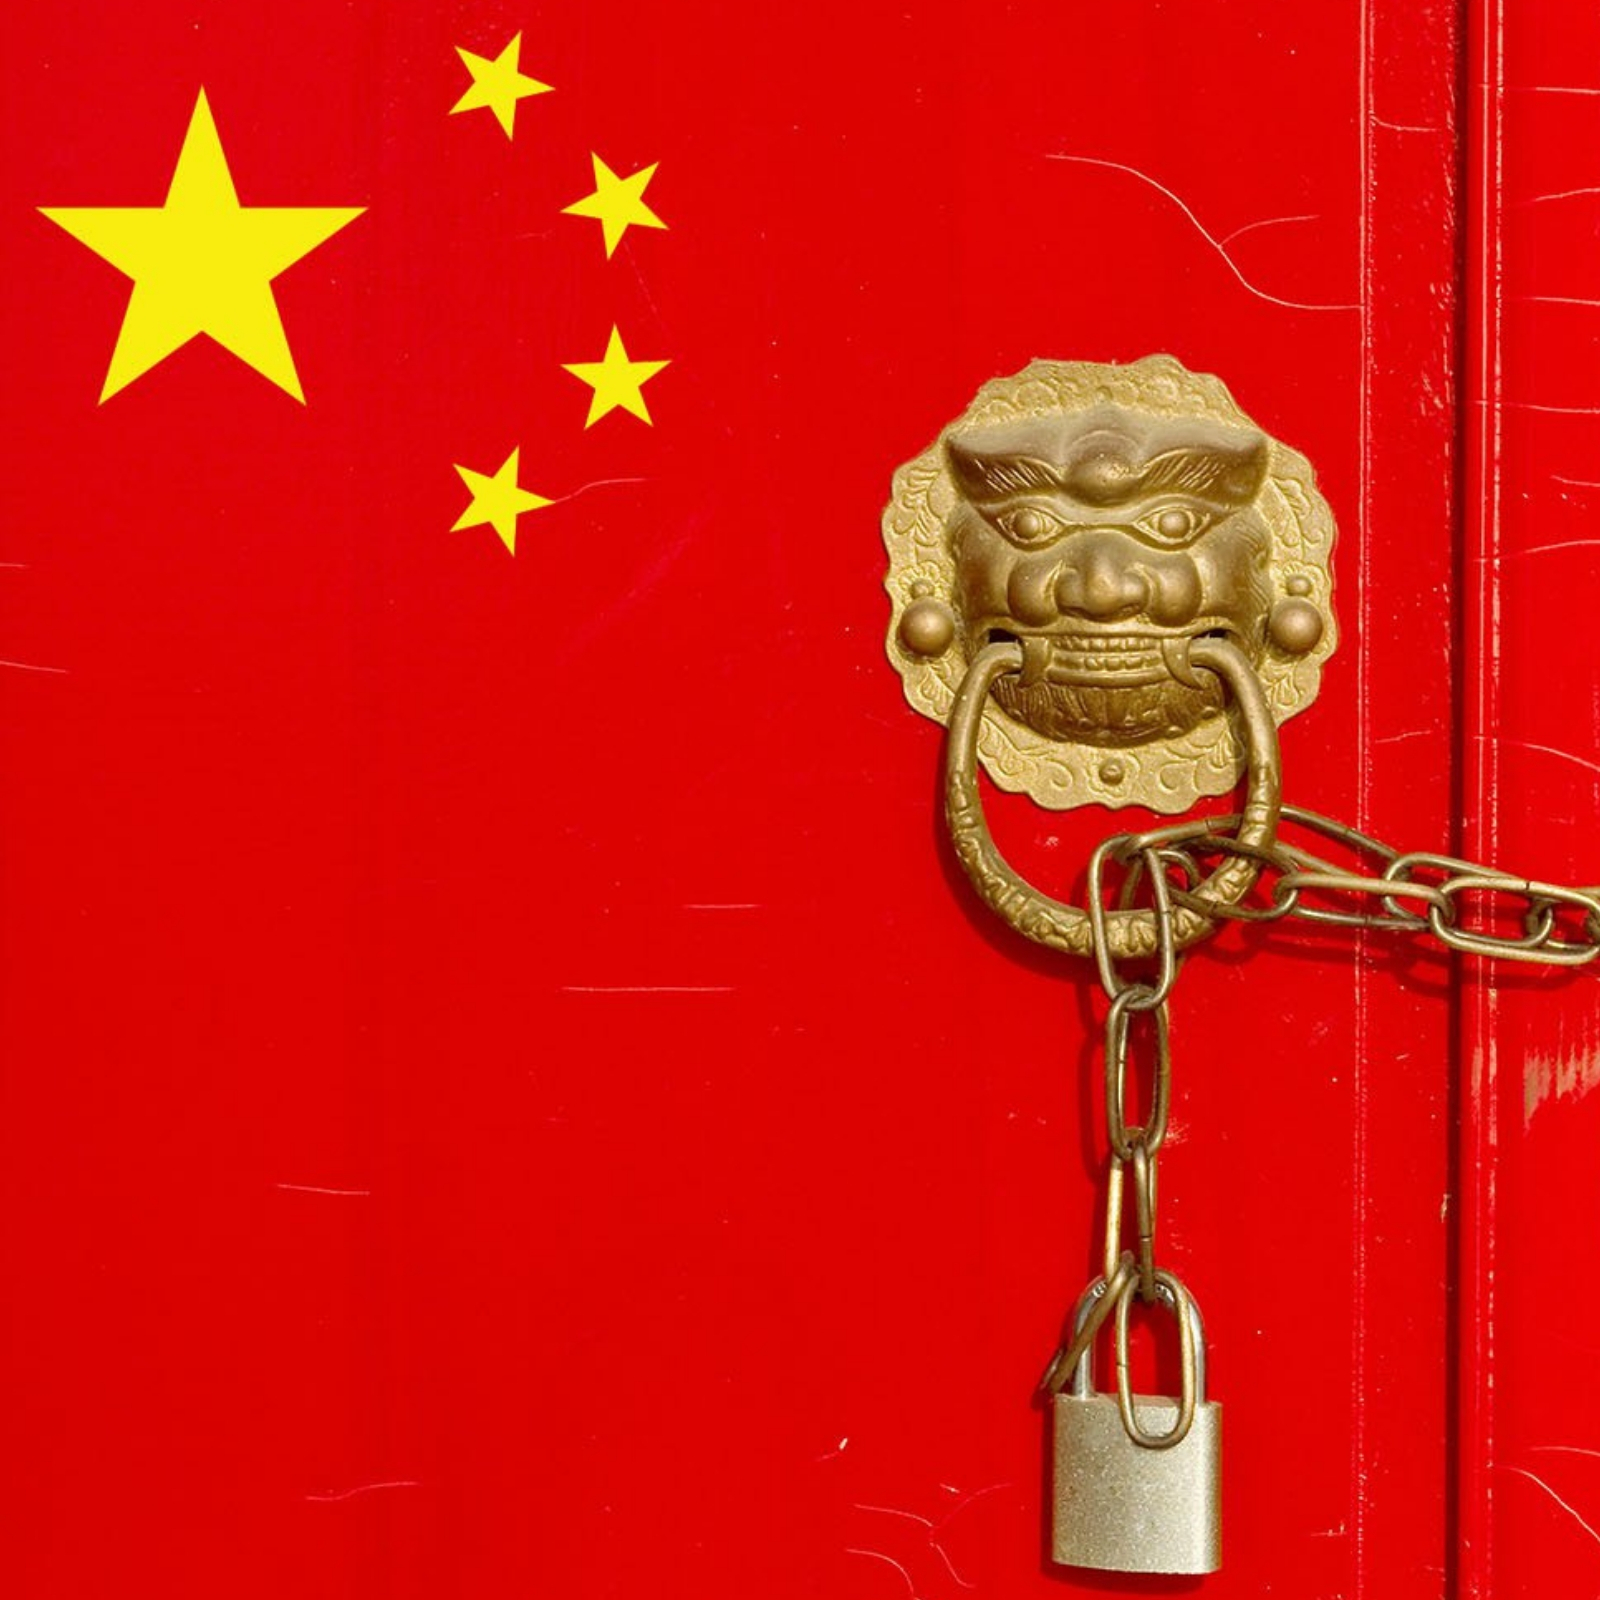 China During Crypto Ban: One Woman Tries to Live on Bitcoin